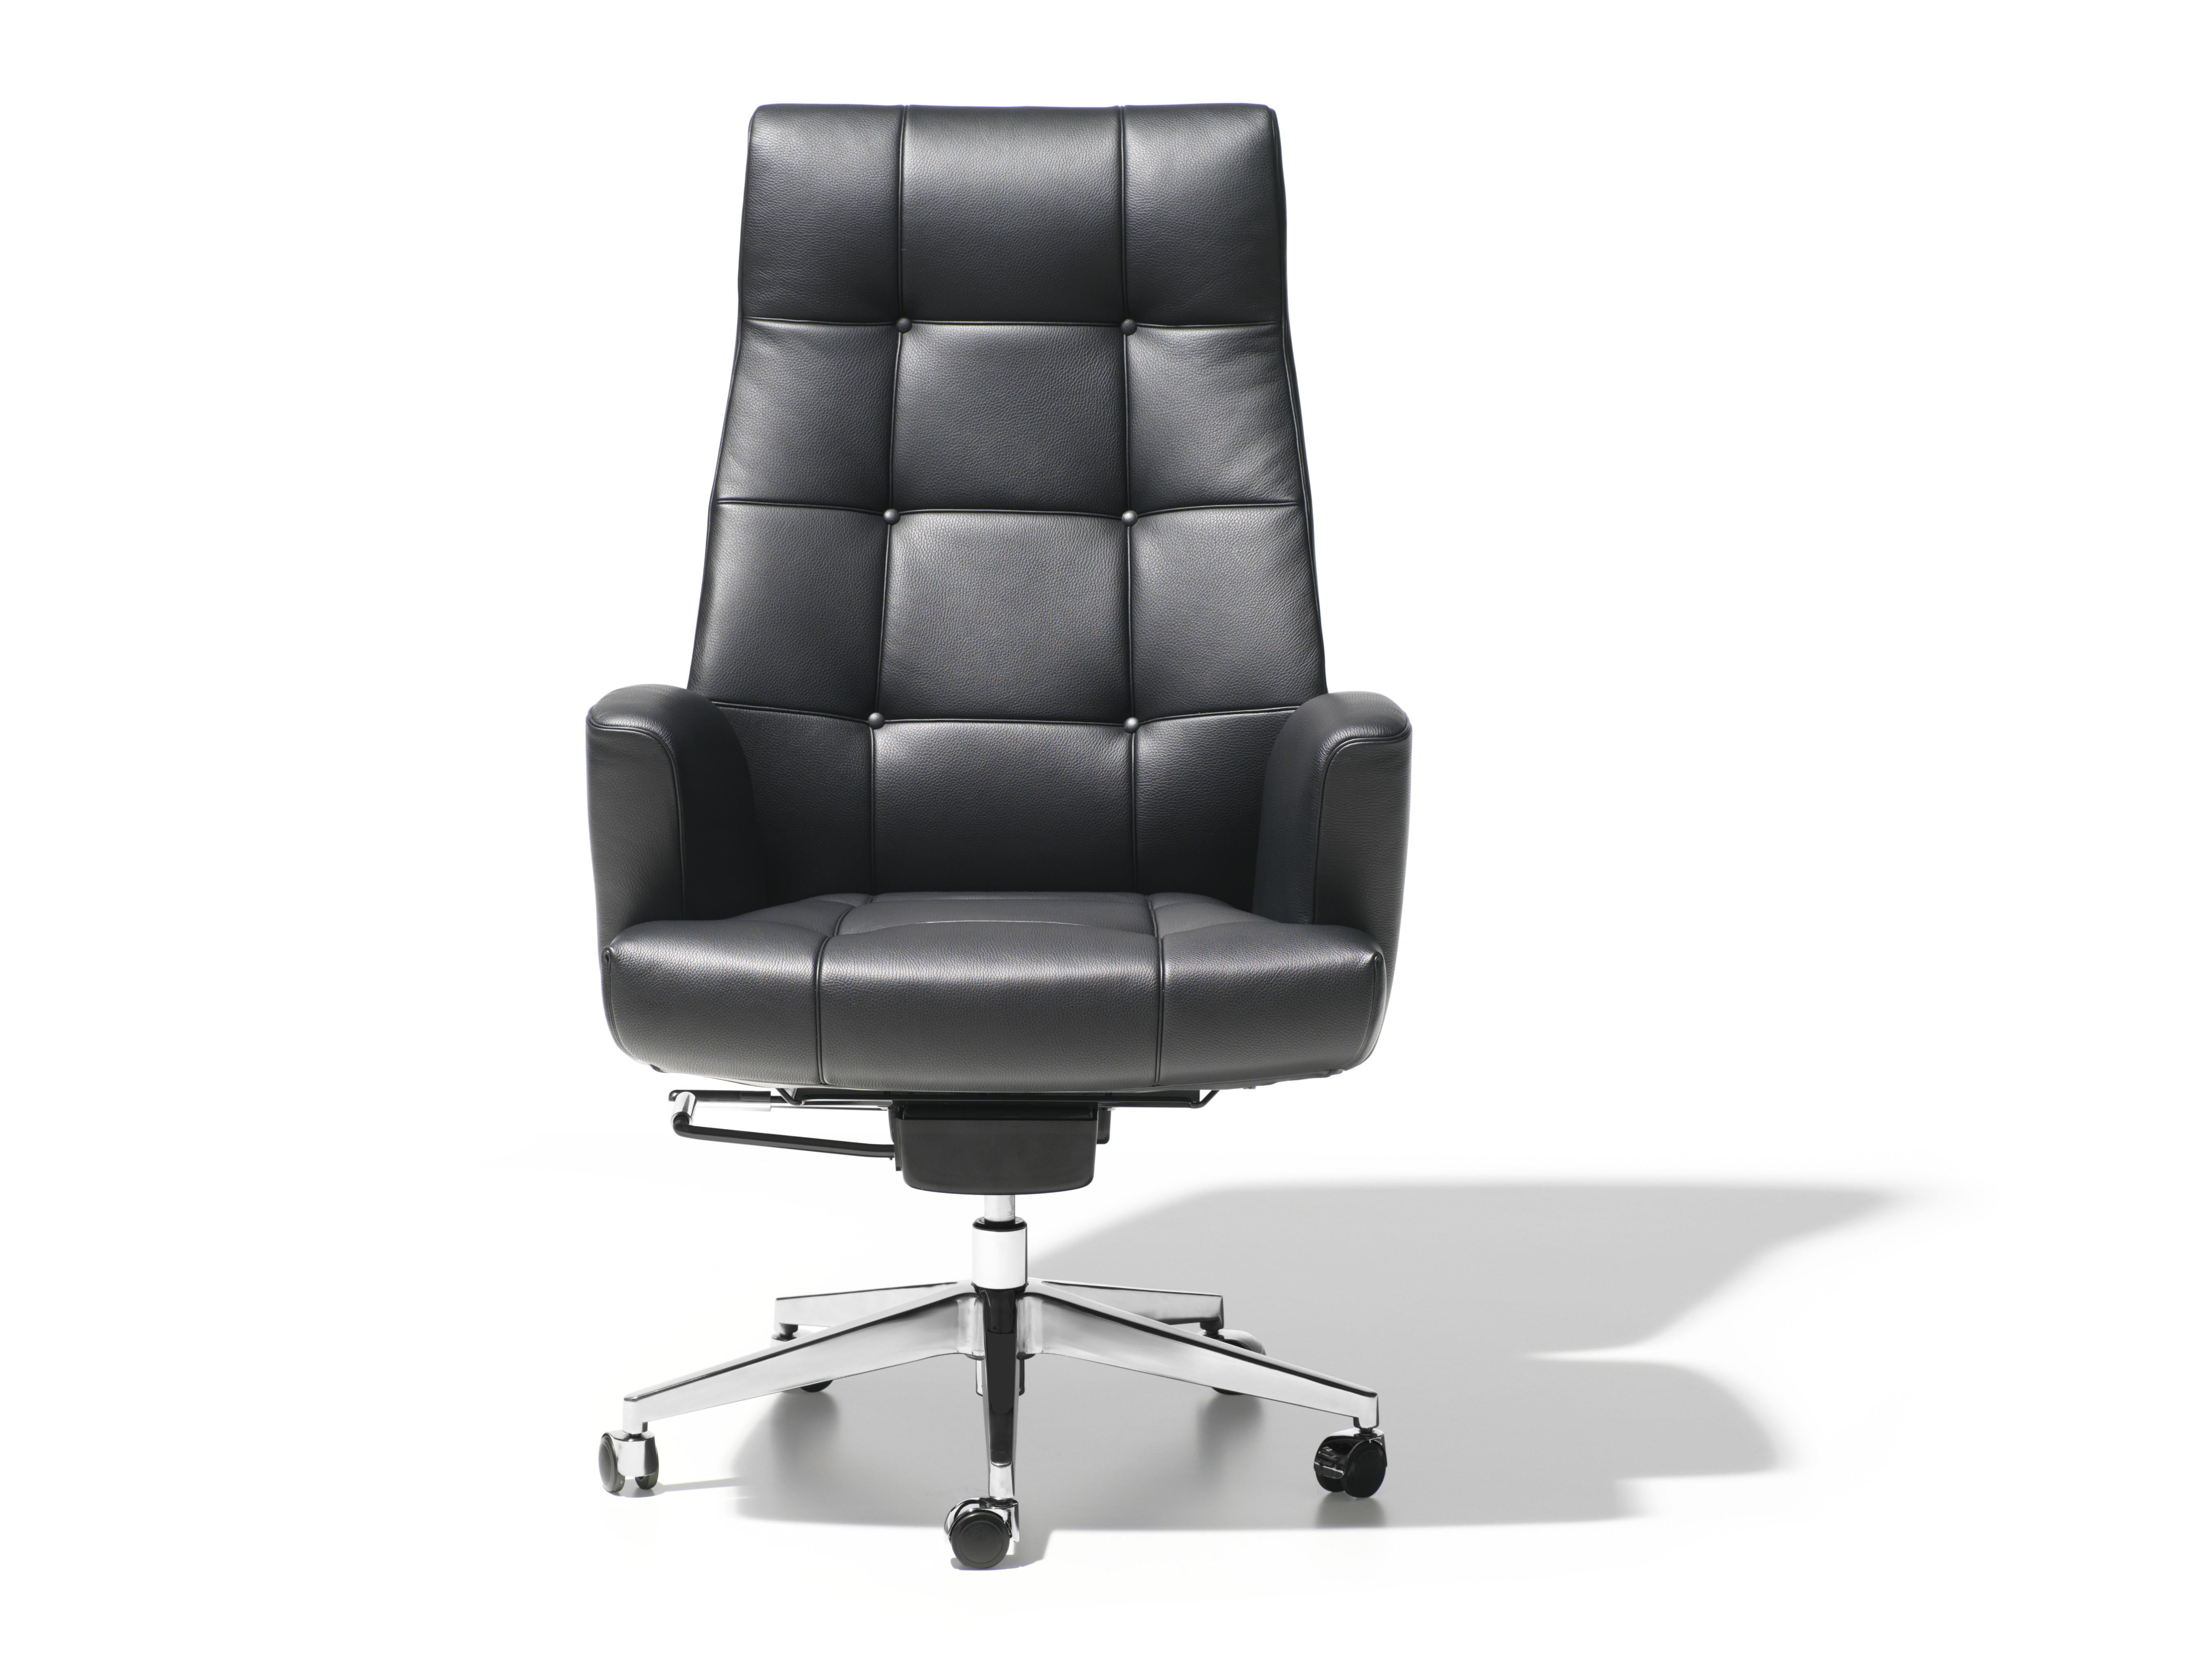 DS-257 armchair by De Sede
Dimensions: D 21 x W 29 x H 46 cm
Materials: aluminium, leather

Prices may change according to the chosen materials and size. 

The executive armchair par excellence with a sense of tradition and a fine sense of